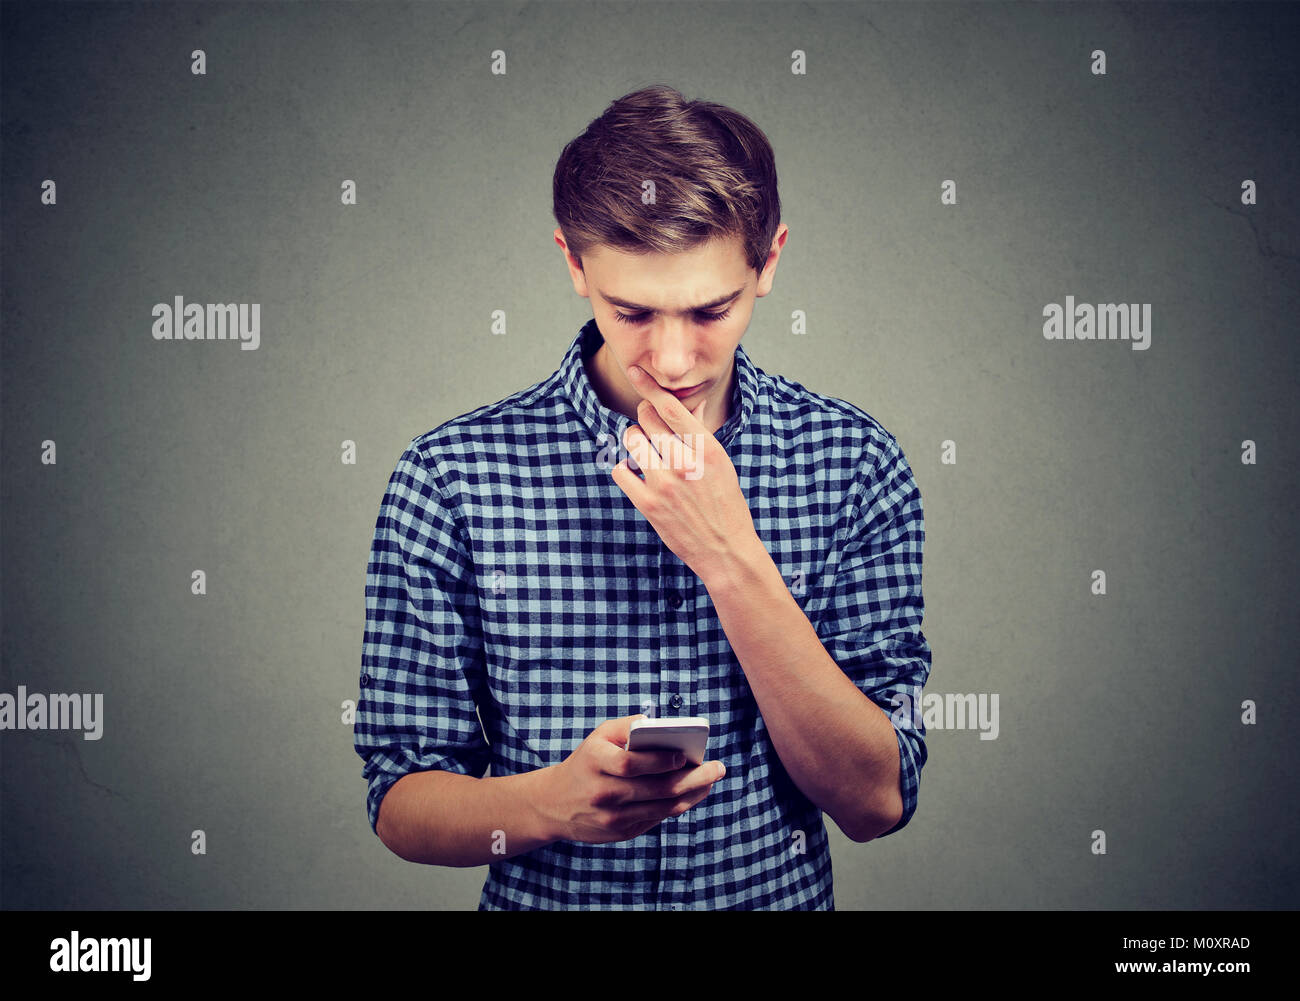 Casual teenager watching smartphone looking confused with complicated gadget. Stock Photo